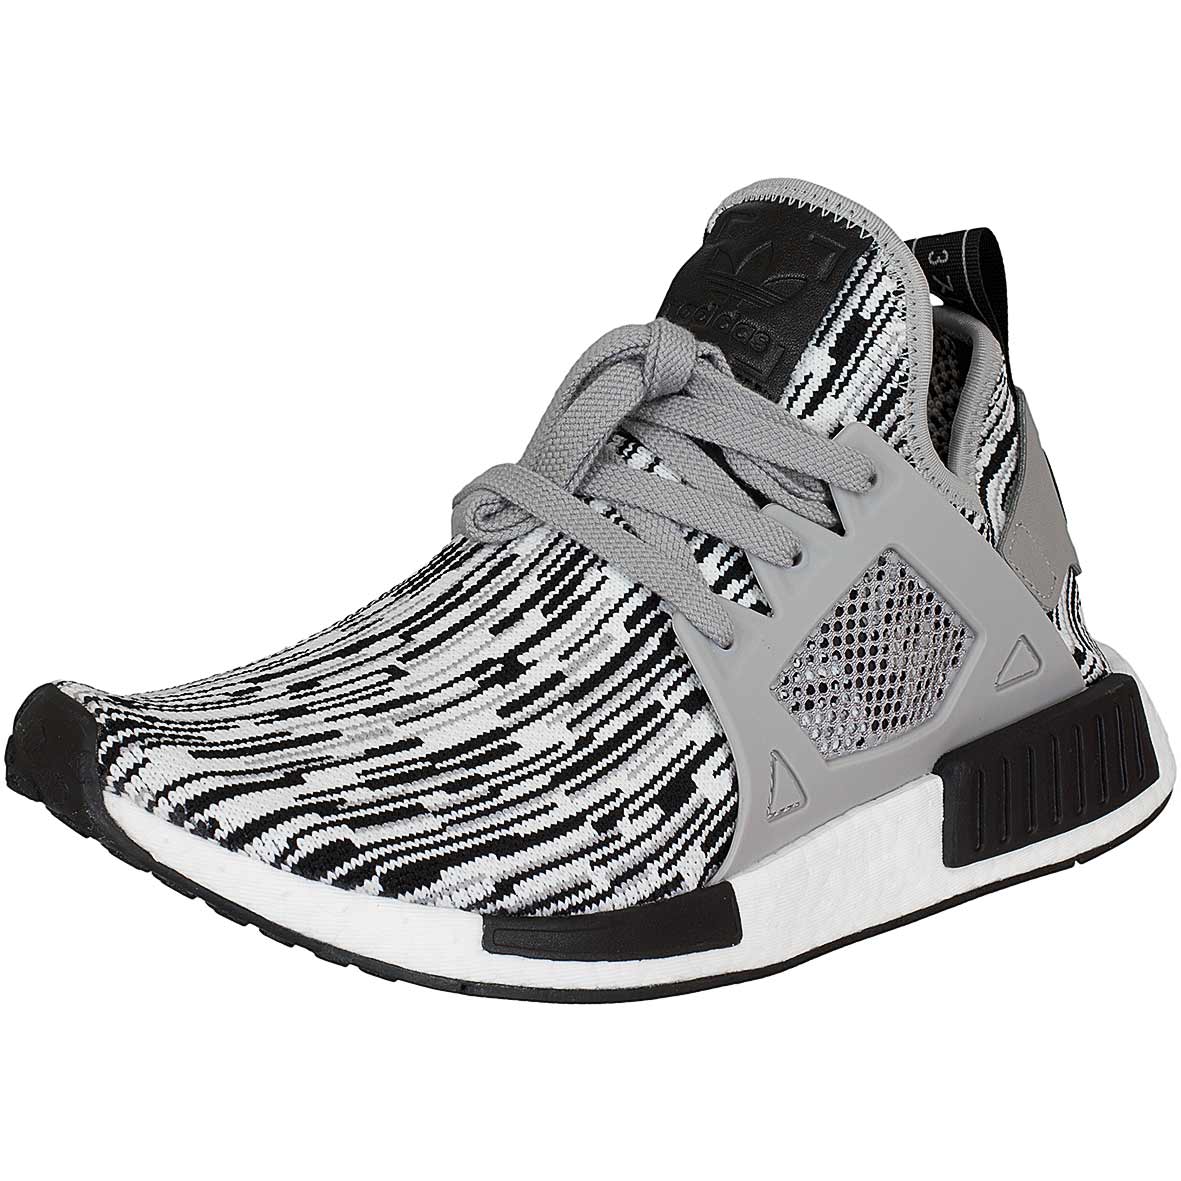 Finish Line Releases Exclusive adidas NMD XR1 sneaker